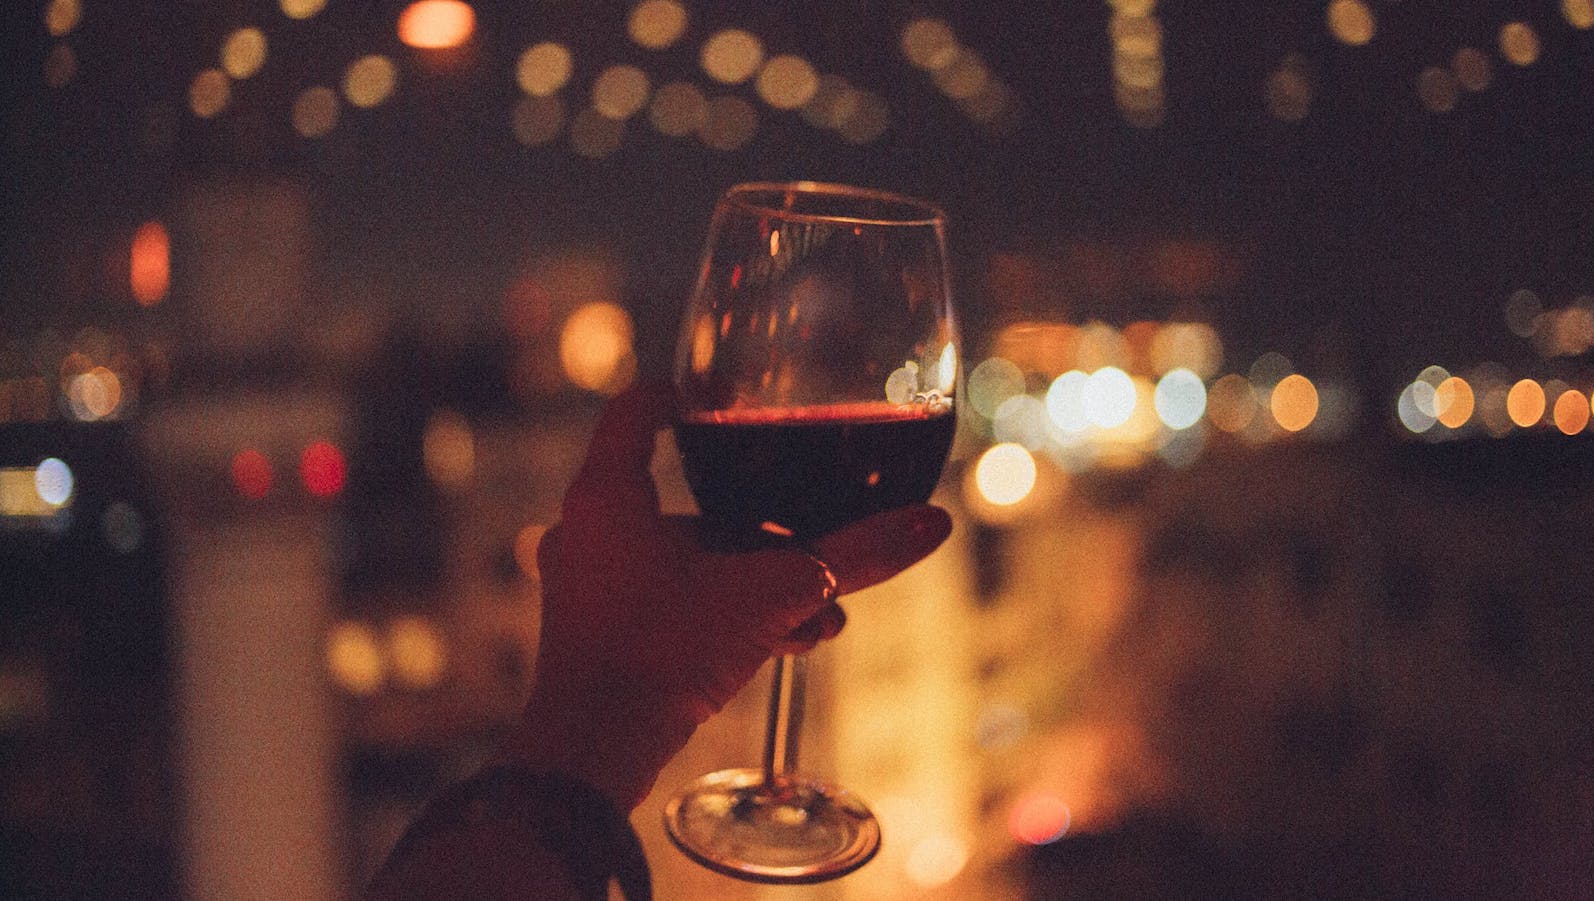 A person's hand holding a glass of red wine in a dark room with some lights